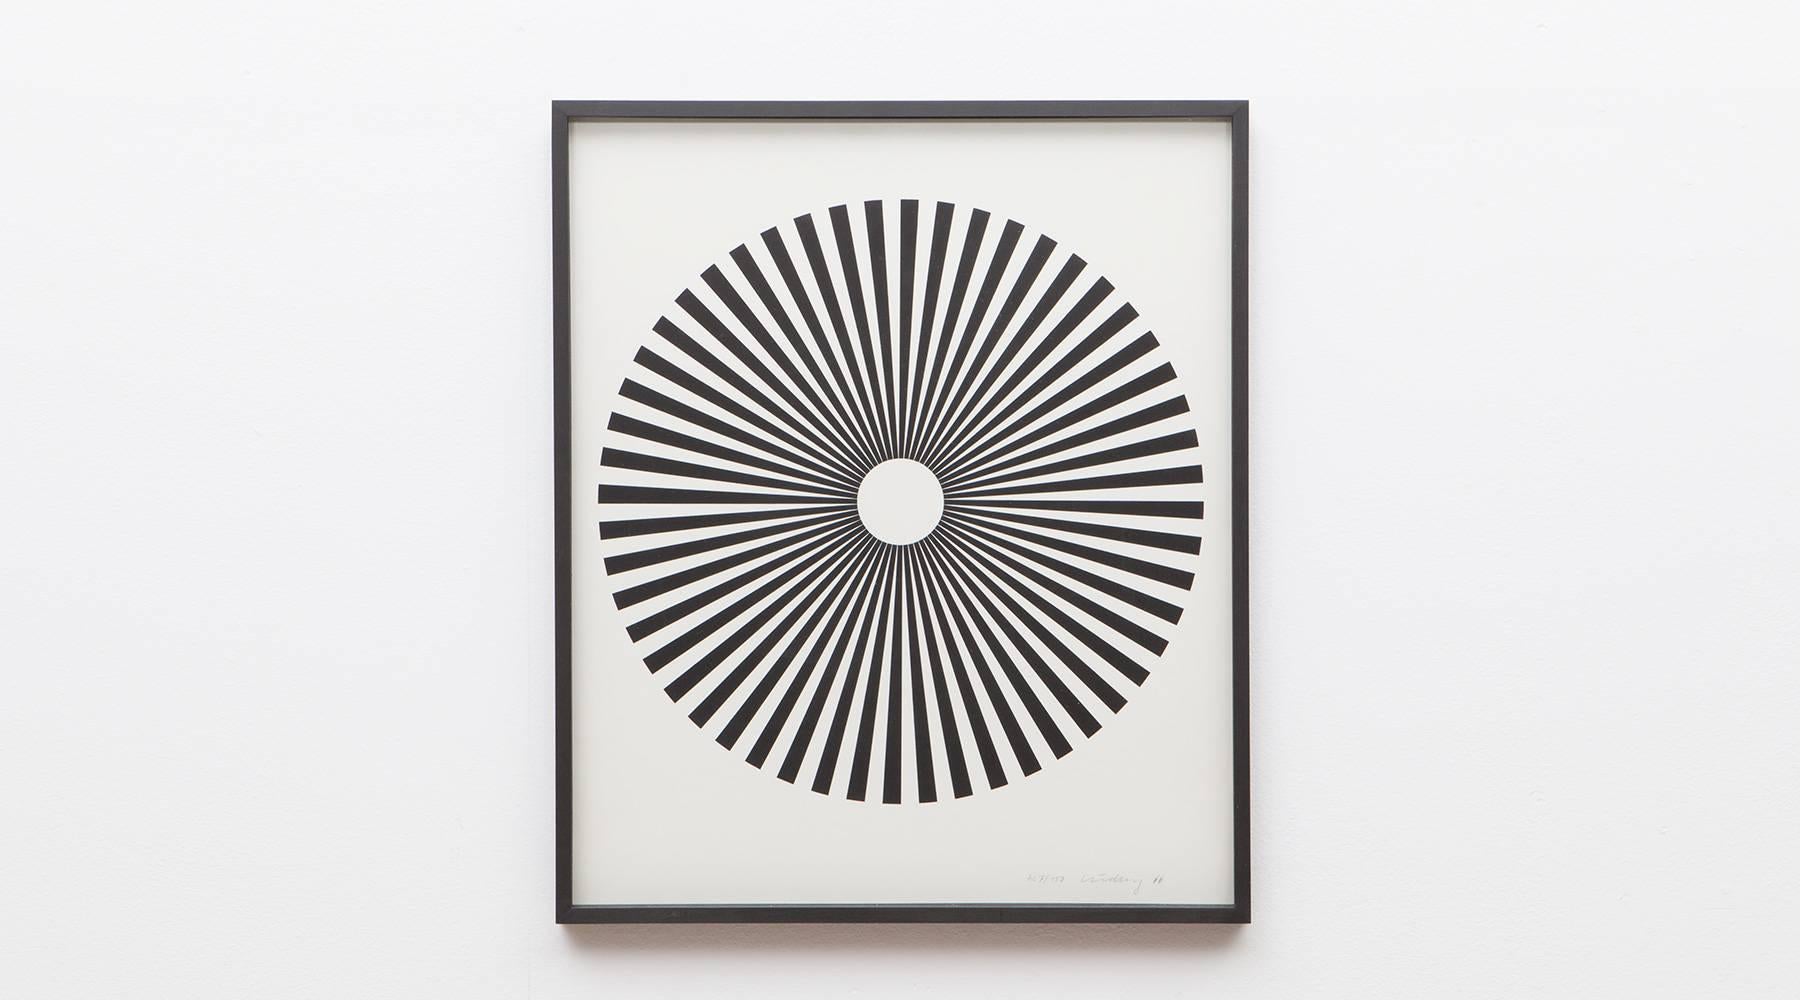 Serigraph on cardboard from German artist Wolfgang Ludwig, which is regarded as one of the most important German representatives of the Op-Art. The work is from 1966 and both are signed in the front, limited edition. Including wooden high-quality